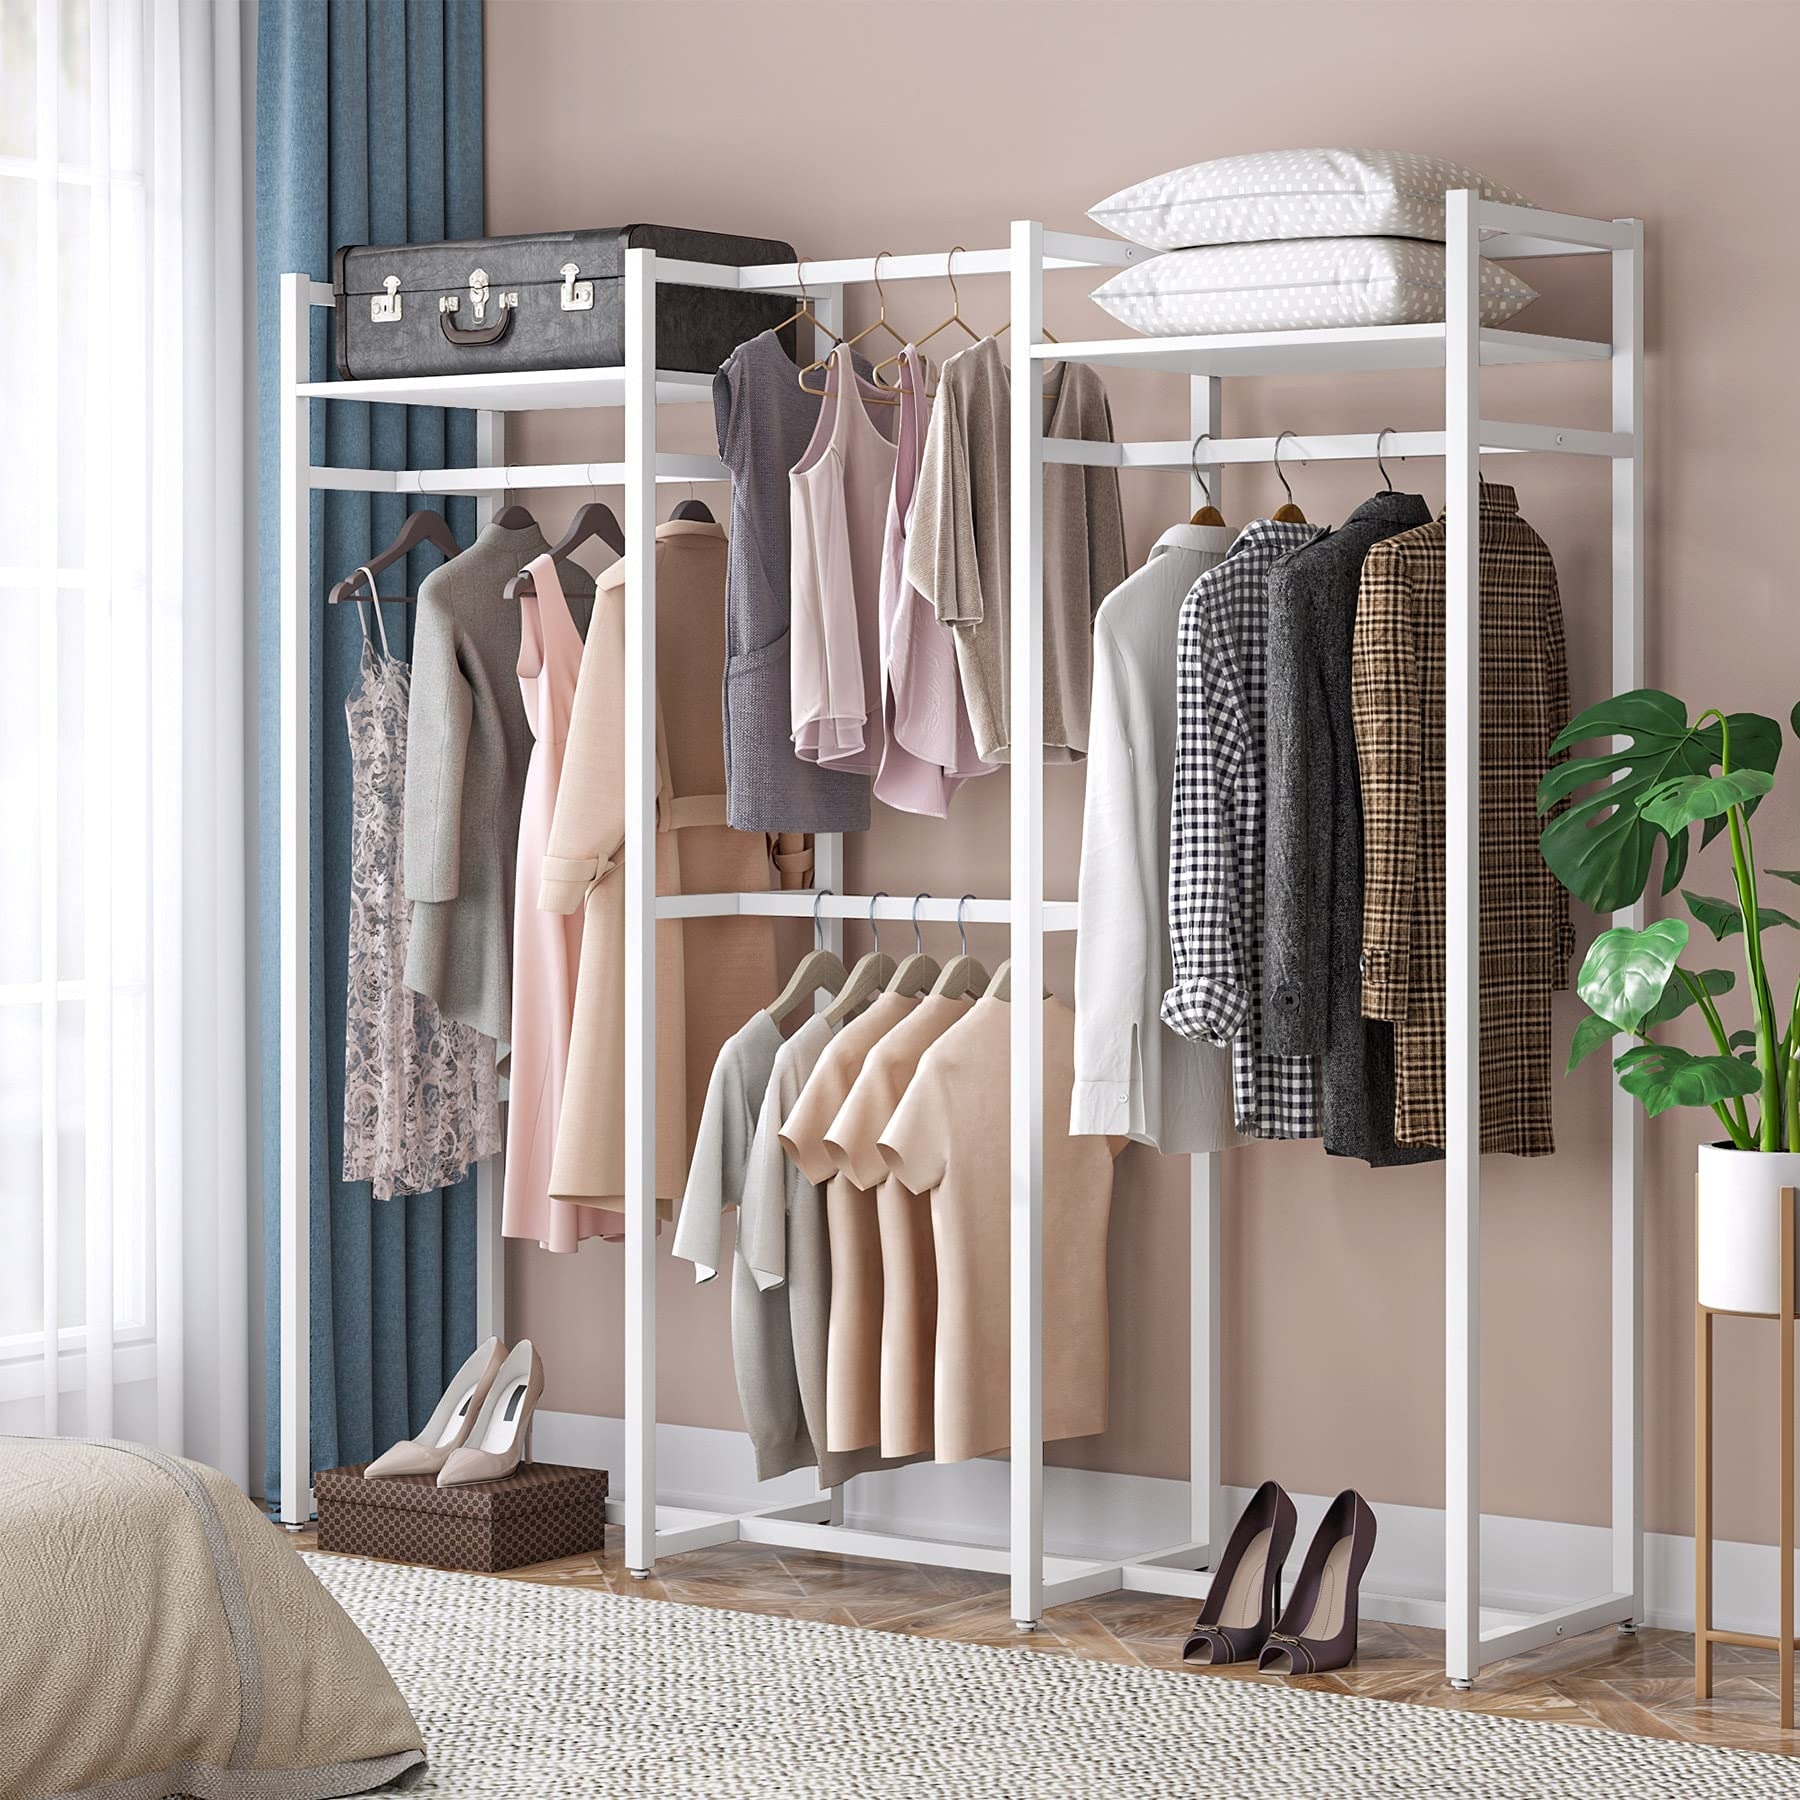 https://ak1.ostkcdn.com/images/products/is/images/direct/b5713b3b47353998b3d9f85860dd71296be5fd03/Garment-Rack-Heavy-Duty-Clothes-Rack-Free-Standing-Closet-Organizer-with-Shelves-and-4-hanging-Rods.jpg